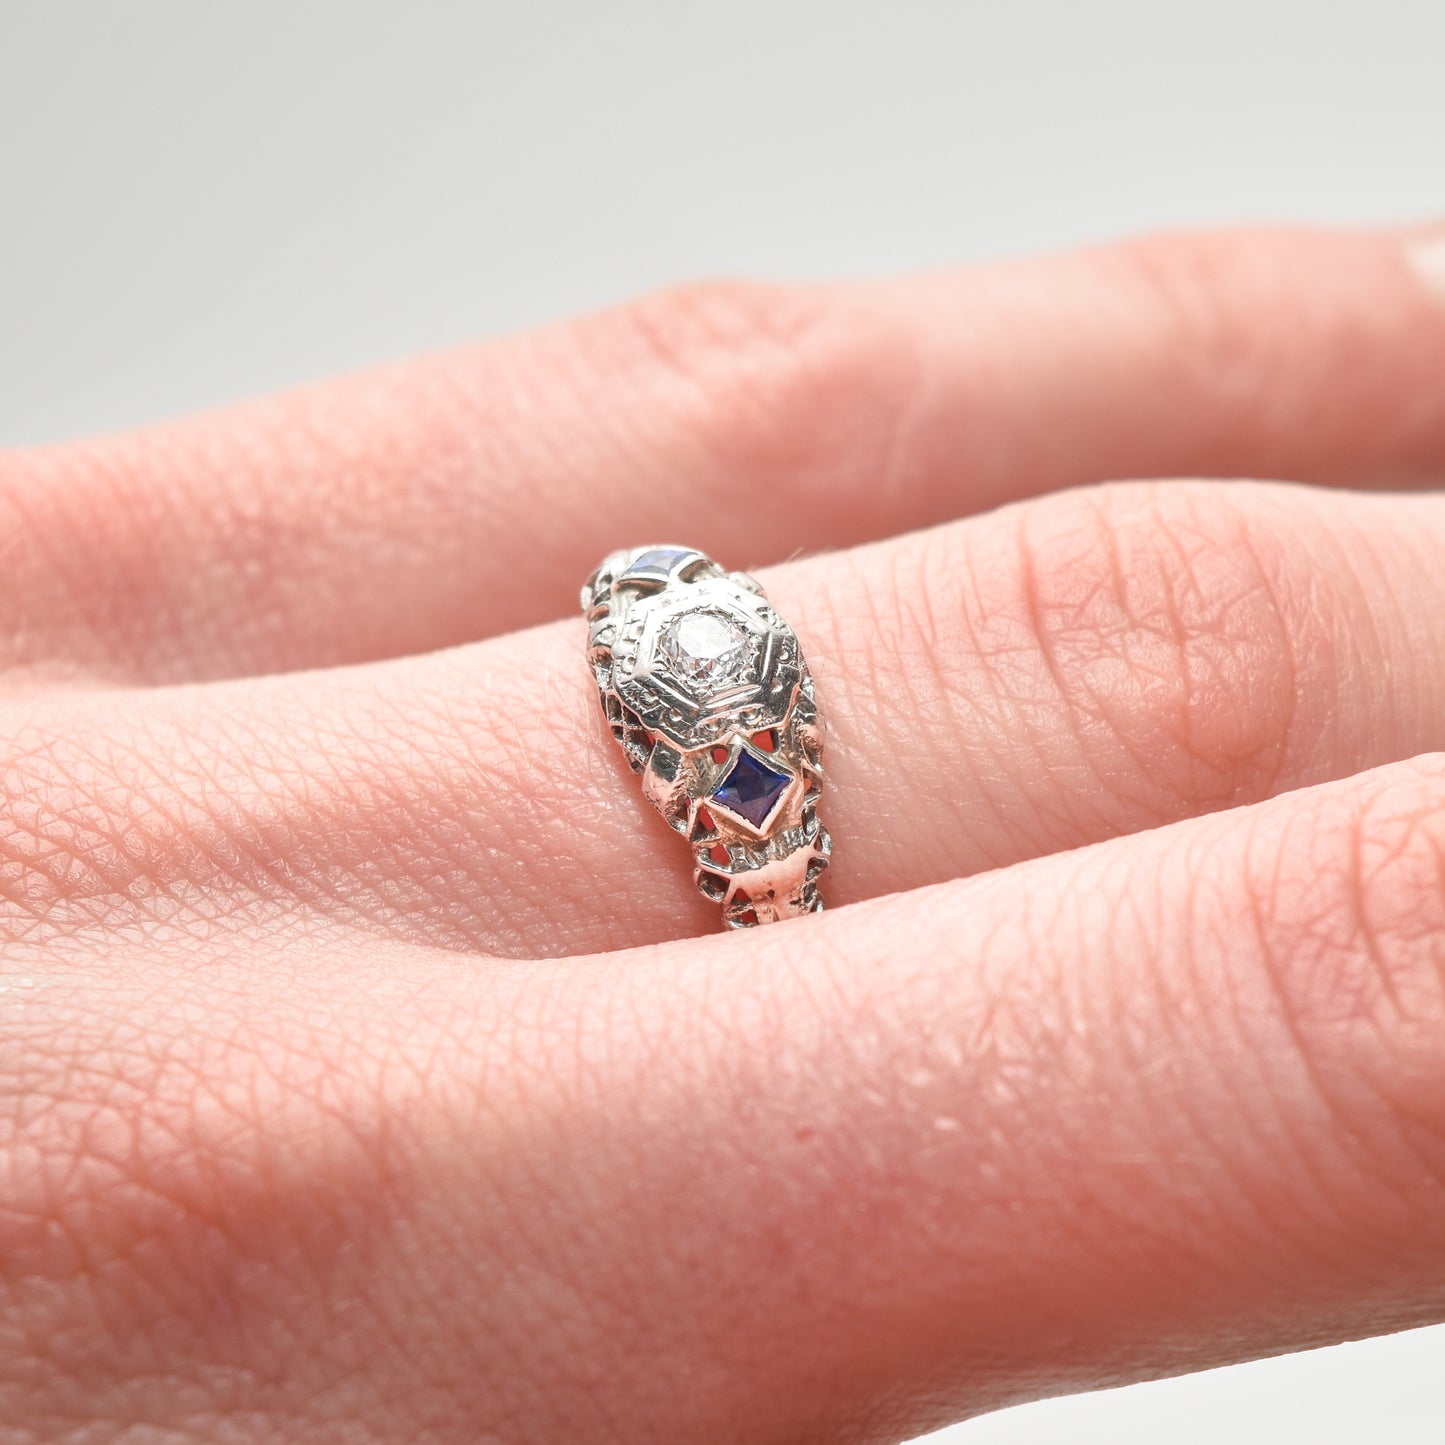 Art Deco 18K white gold diamond and sapphire filigree engagement ring with natural diamonds and synthetic sapphires, size 6.25 US, on a finger against a white background.